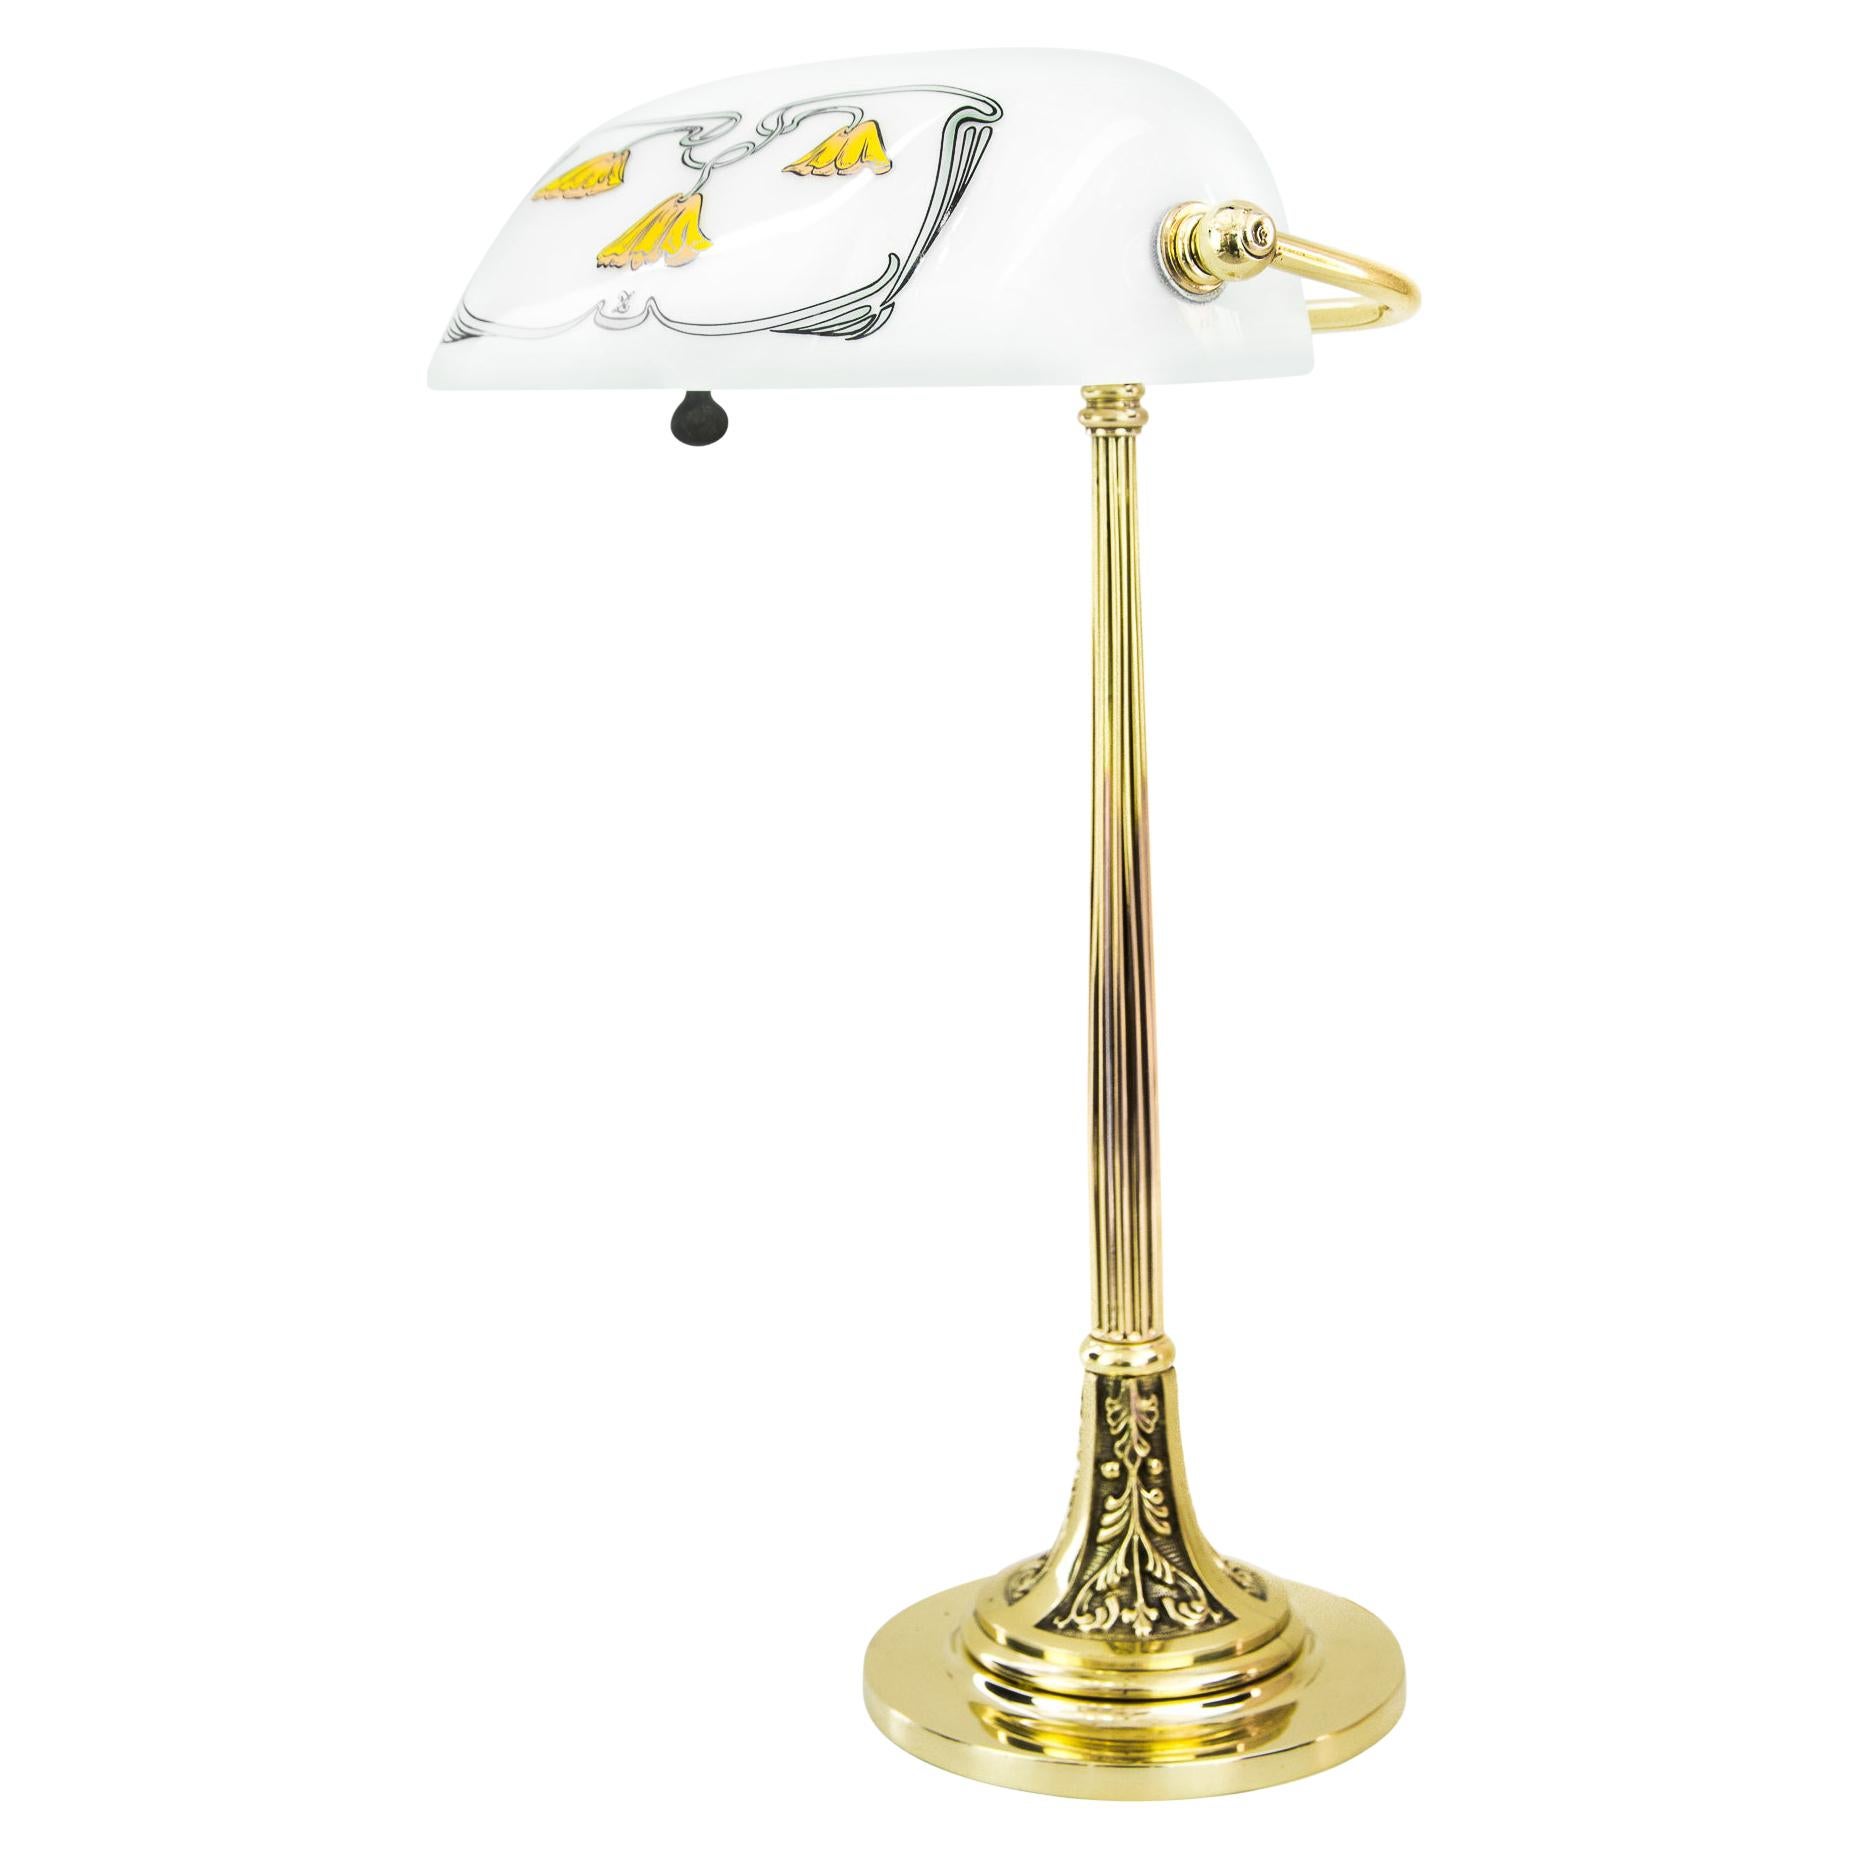 Jugendstil Table Lamp with New Glass Shade, Vienna, circa 1908